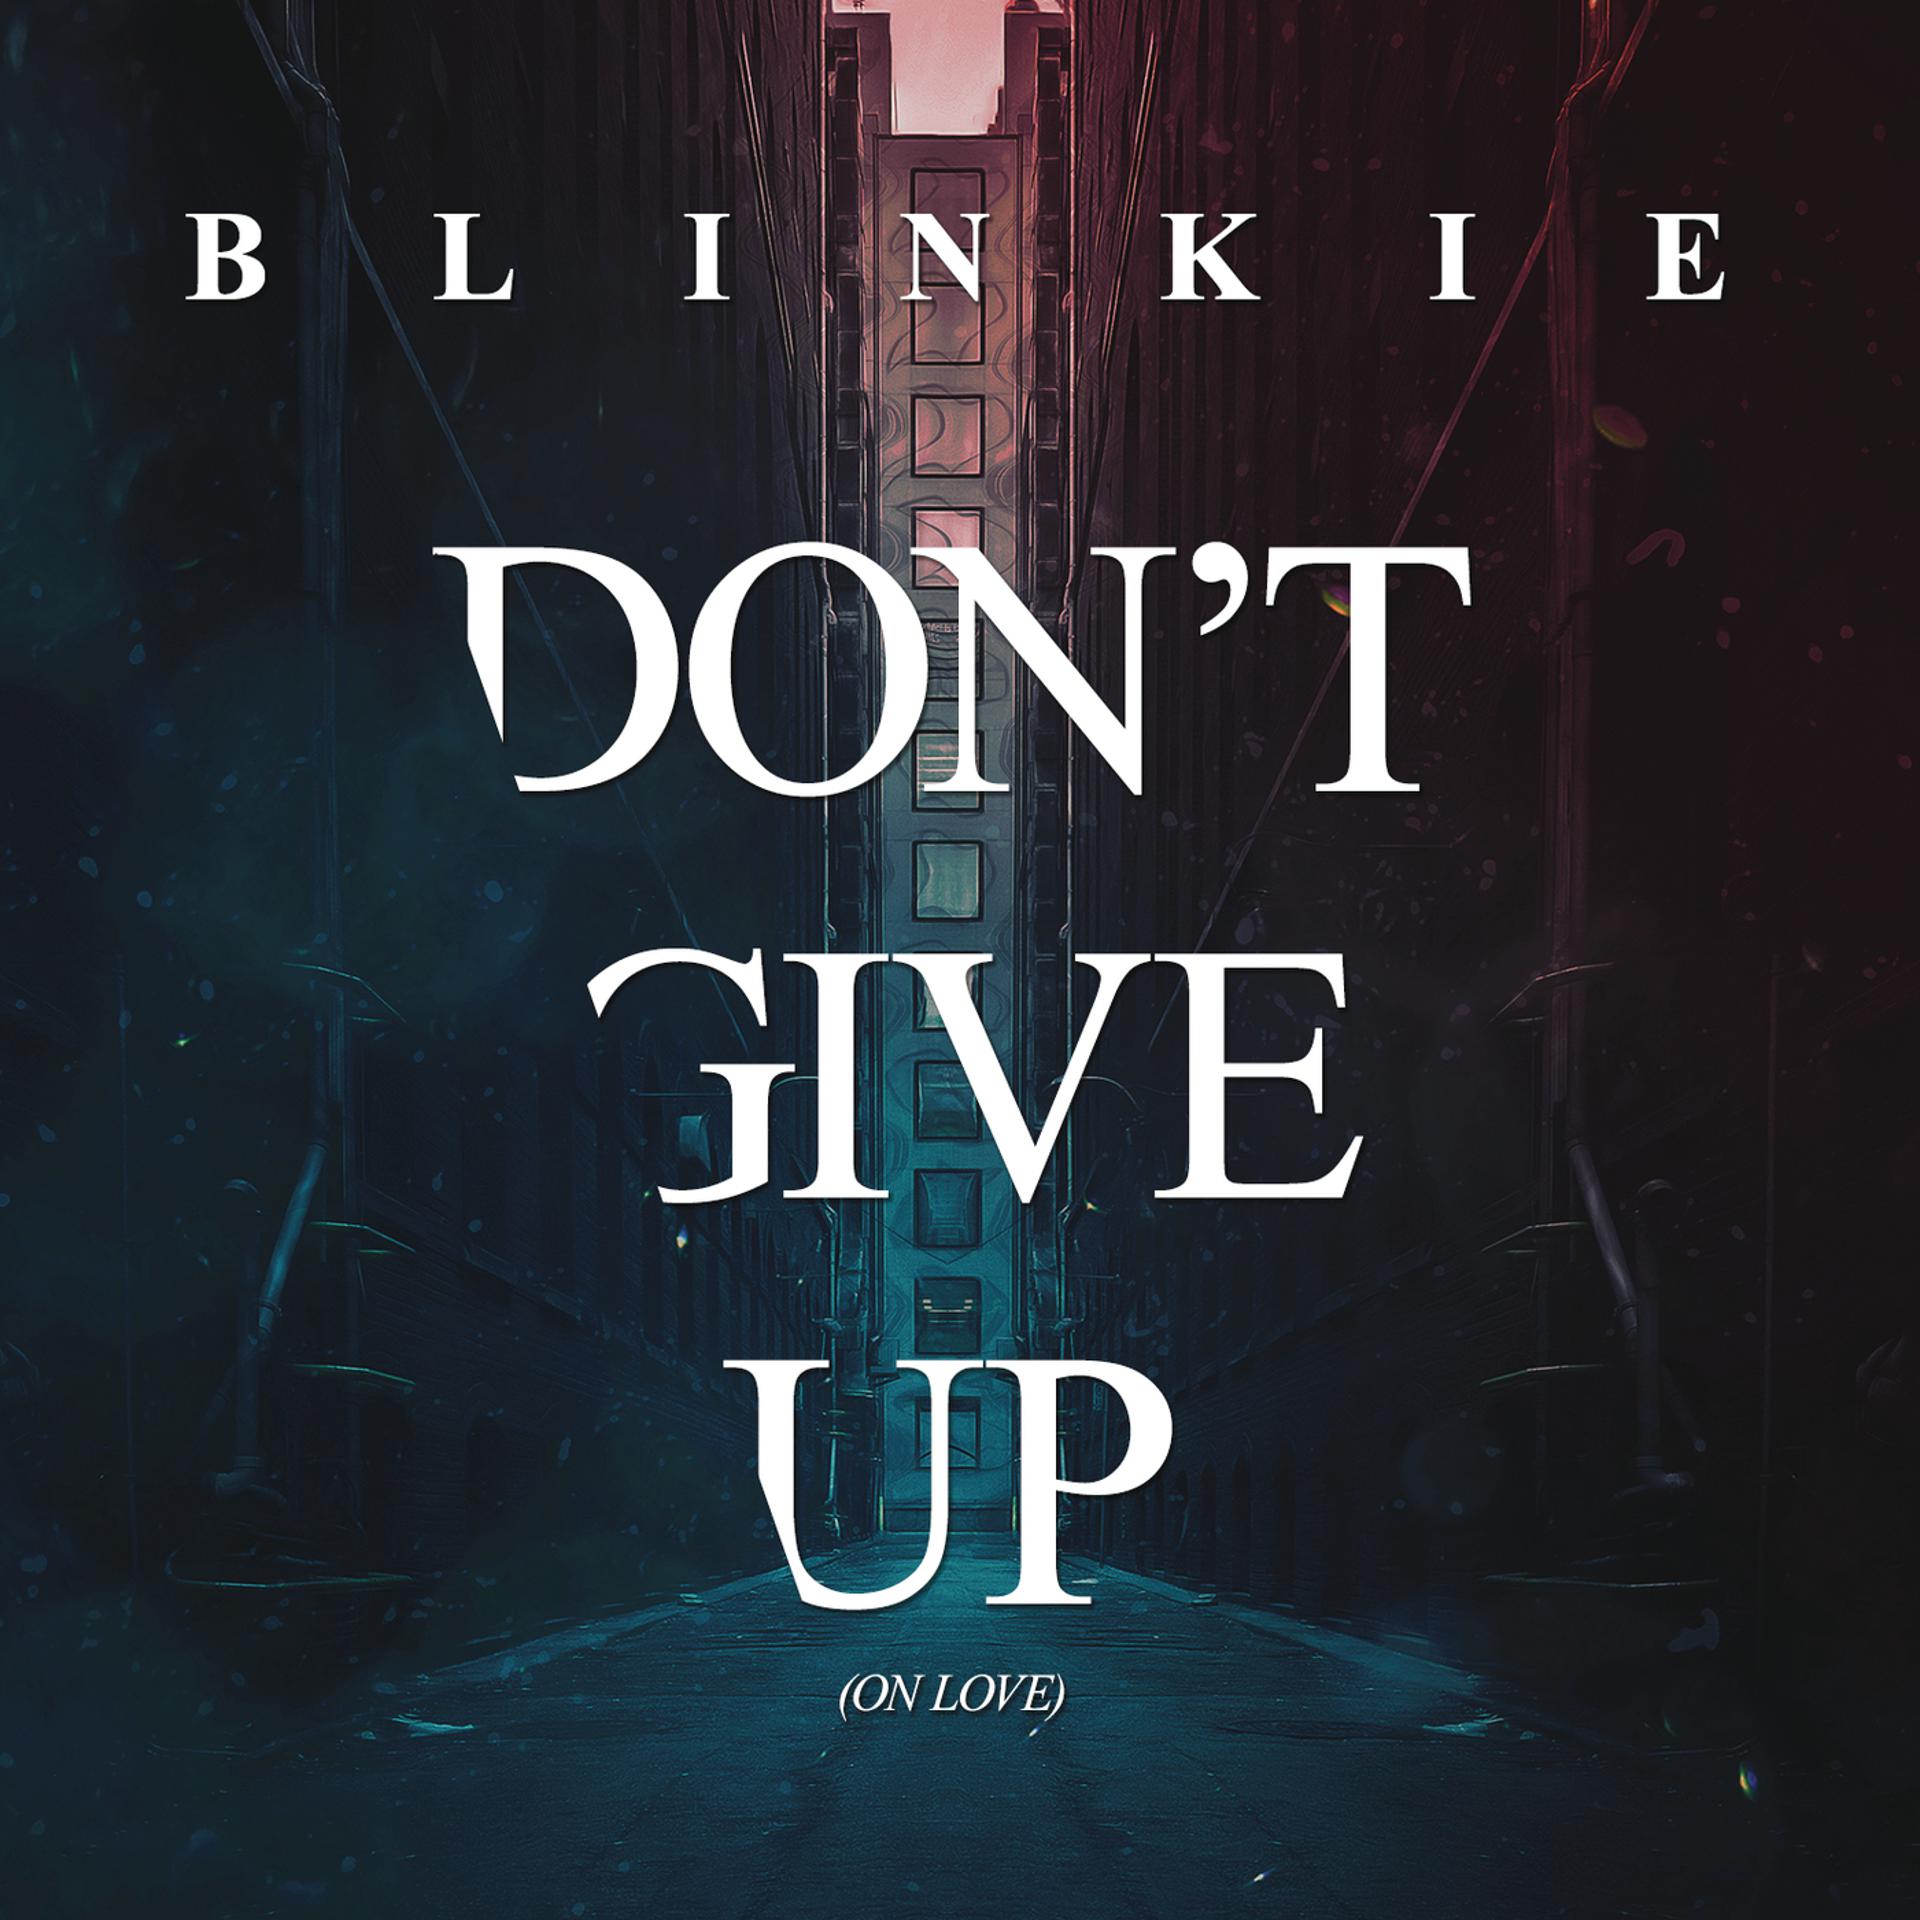 Don`t give up. Don't give up картинка. Don`t give up текст. Blinkie feat Alahna-don't give up. Донт гив ап